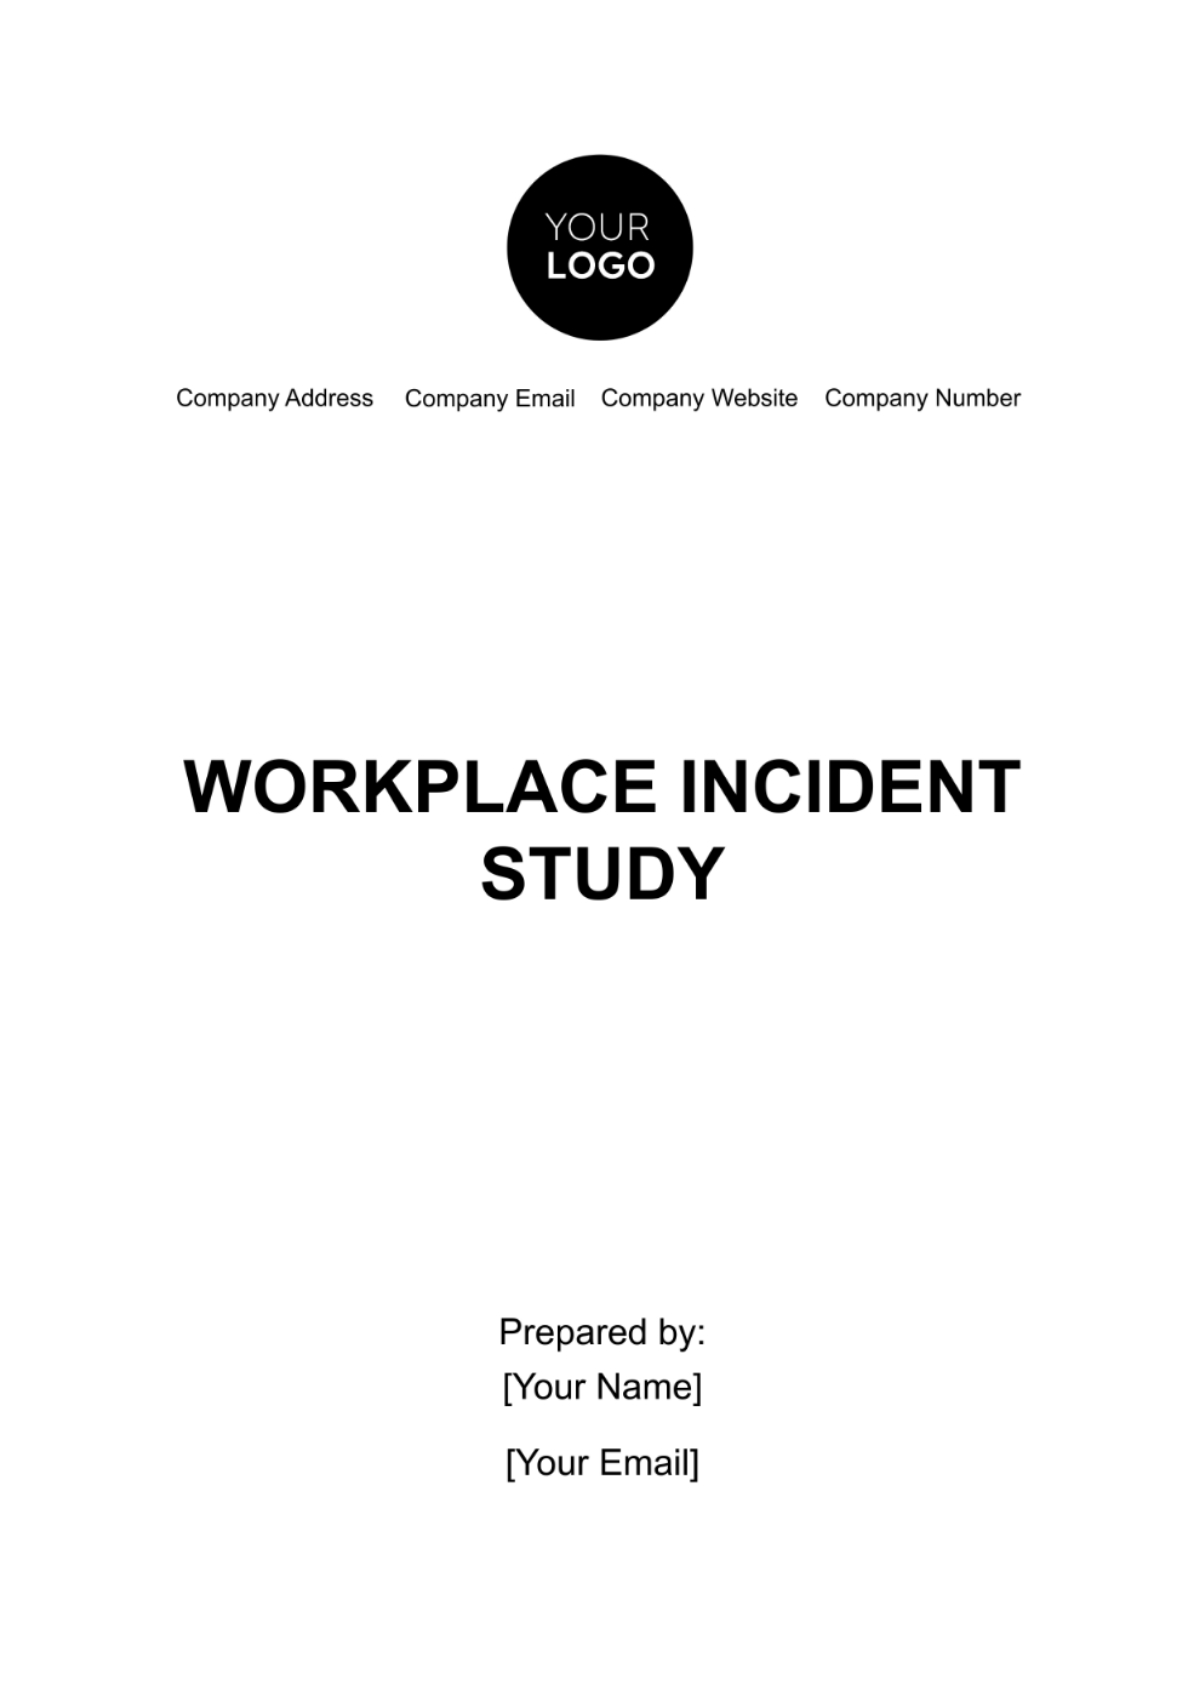 Workplace Incident Study Template